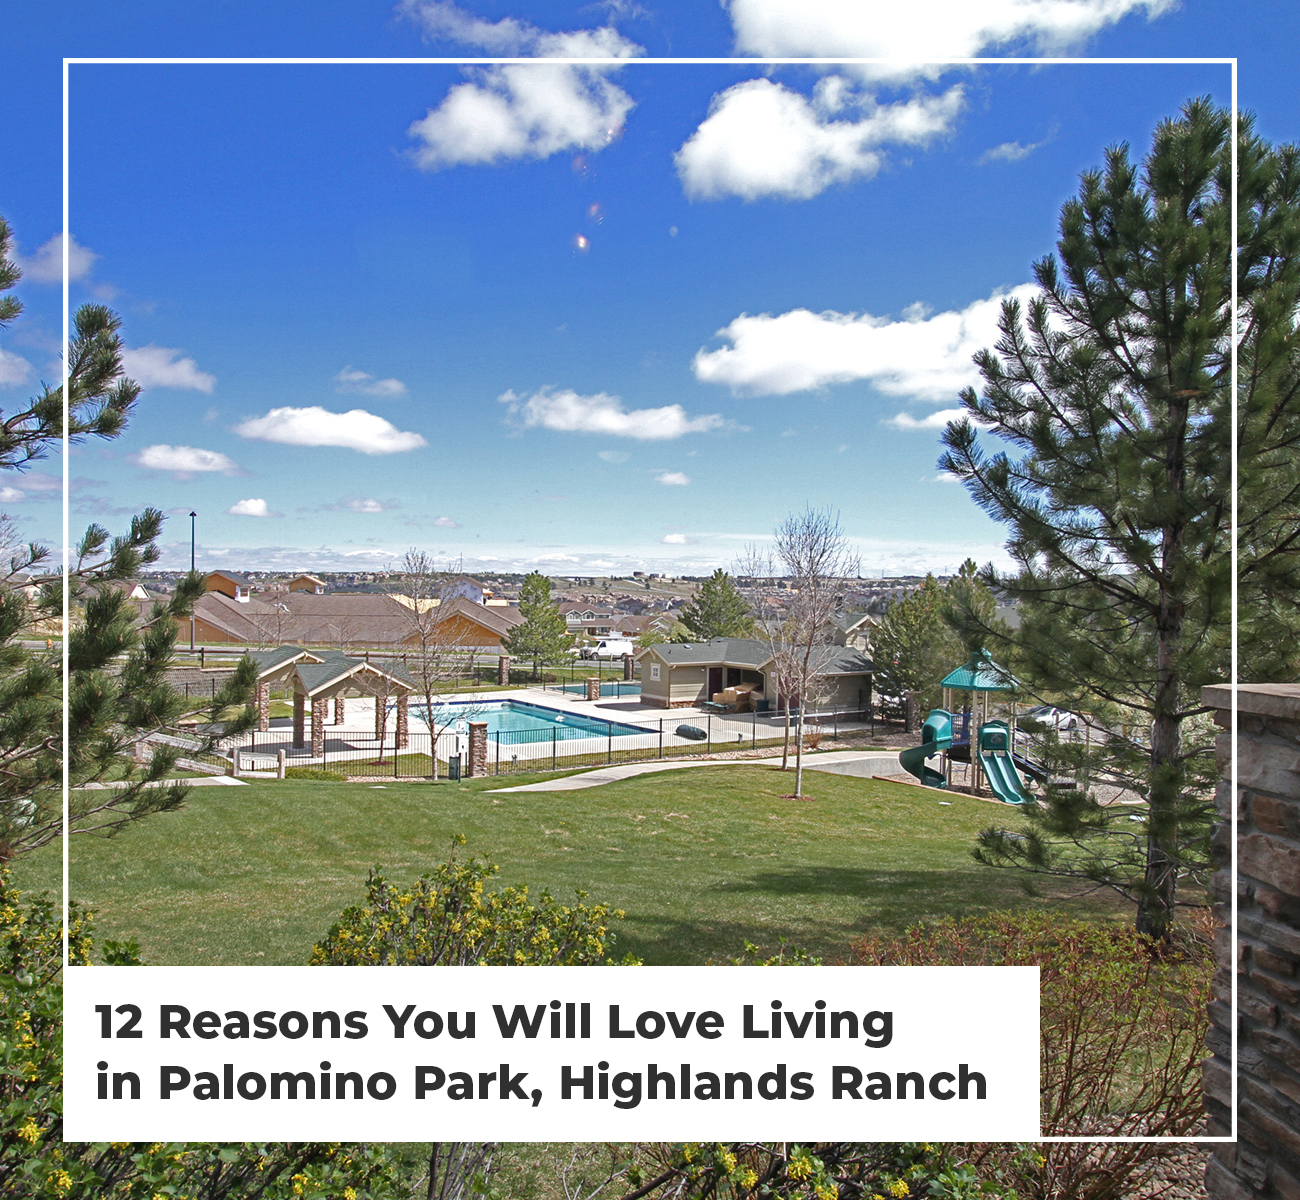 12 Reasons You Will Love Living in Palomino Park, Highlands Ranch